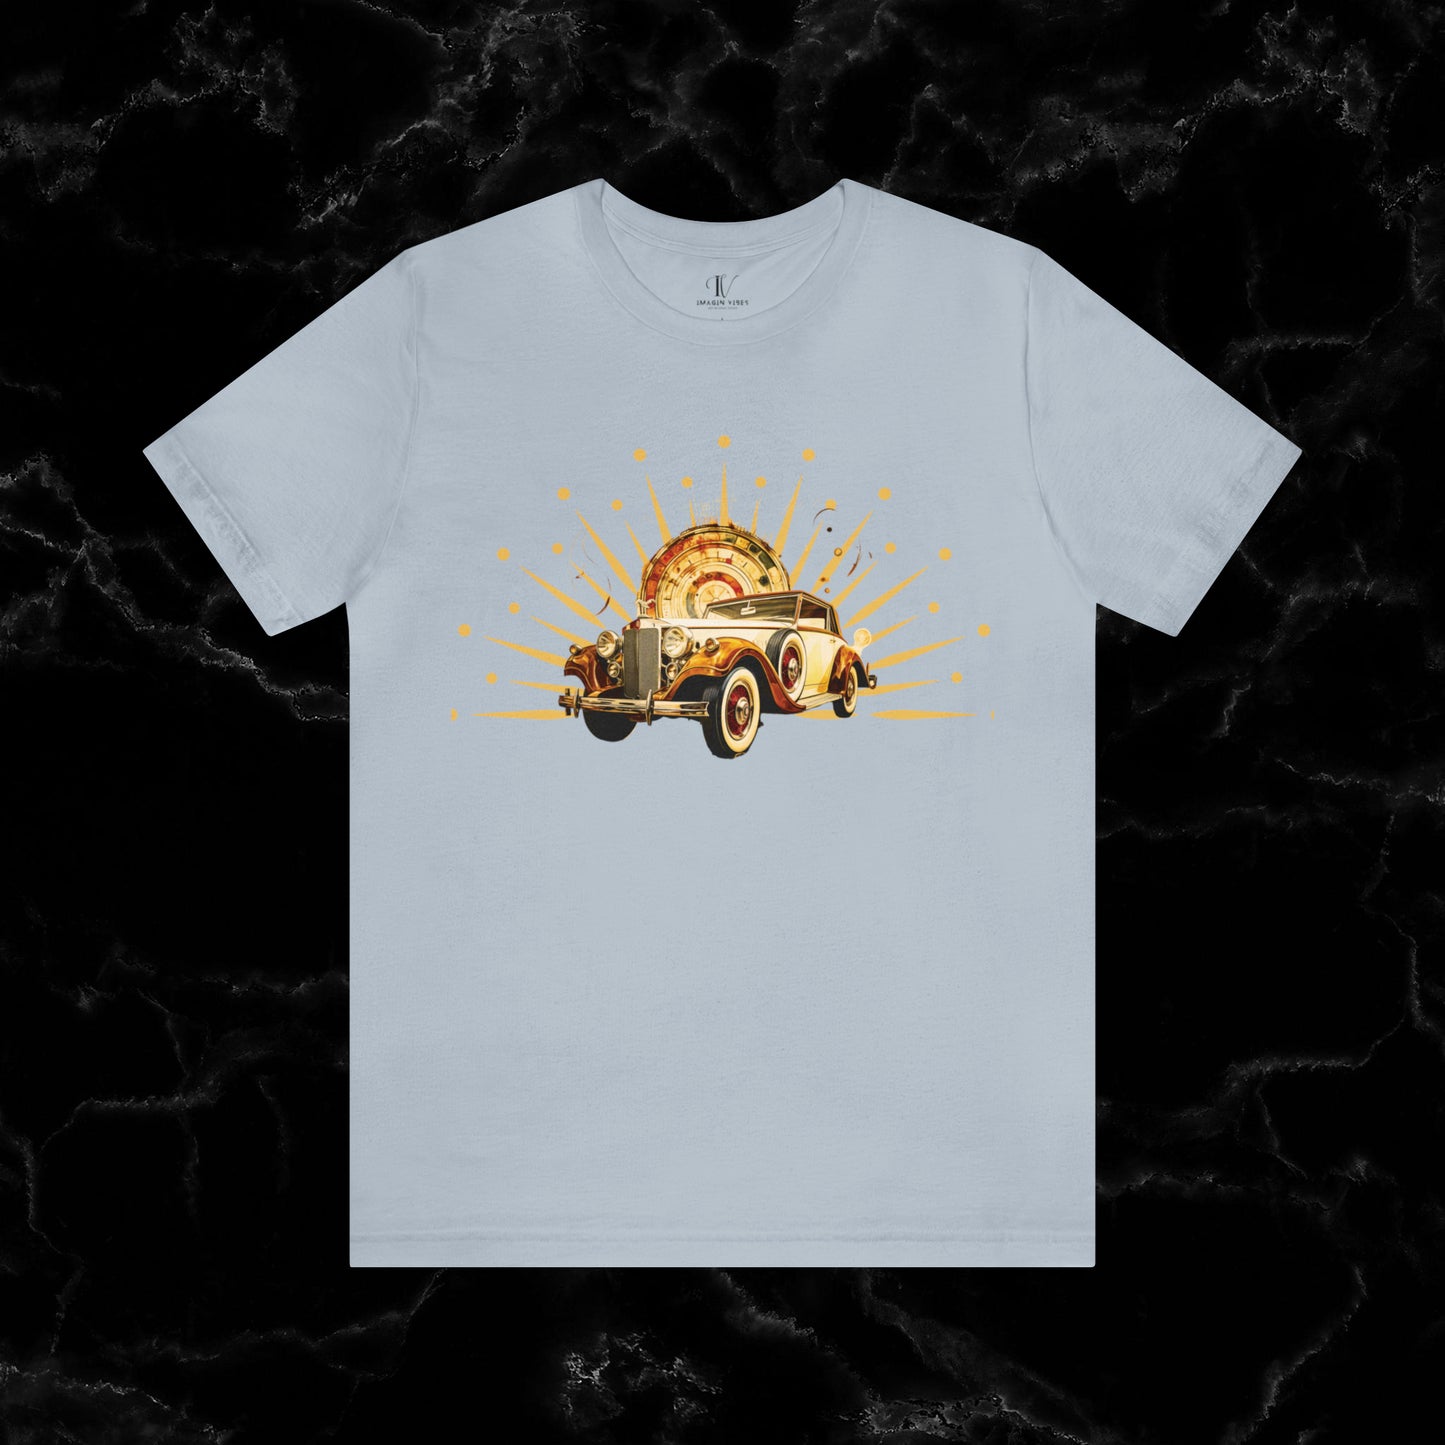 Vintage Car Enthusiast T-Shirt with Classic Wheels and Timeless Appeal Nostalgic T-Shirt Light Blue S 